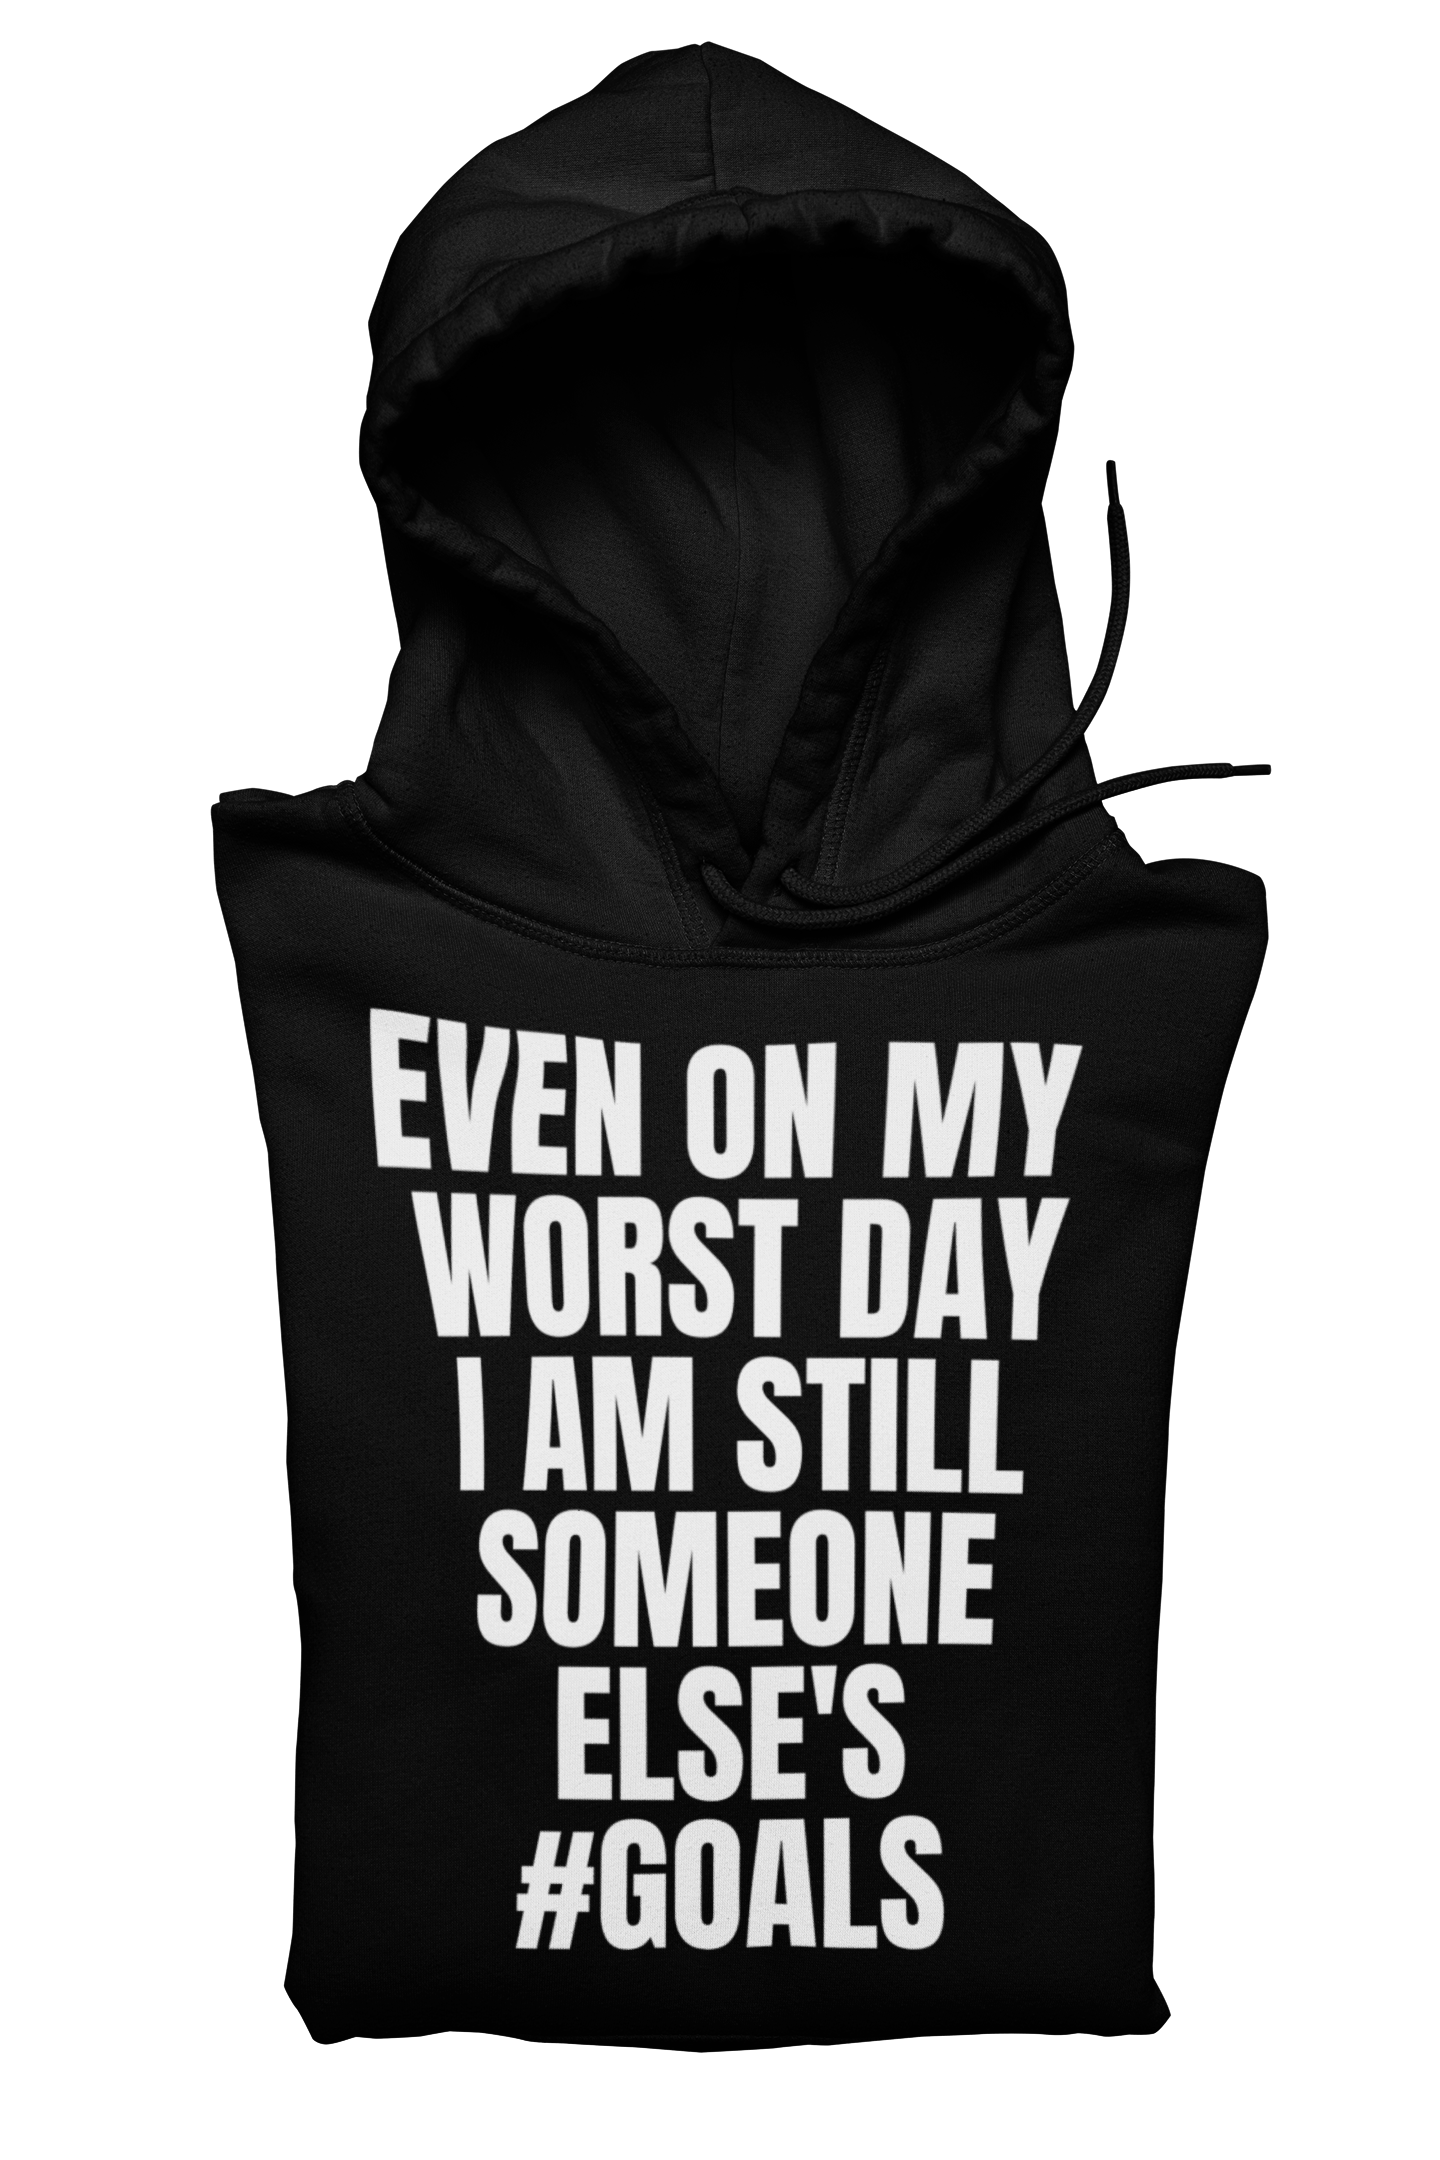 EVEN ON MY WORST DAY - Hoodie (BLACK/WHITE)